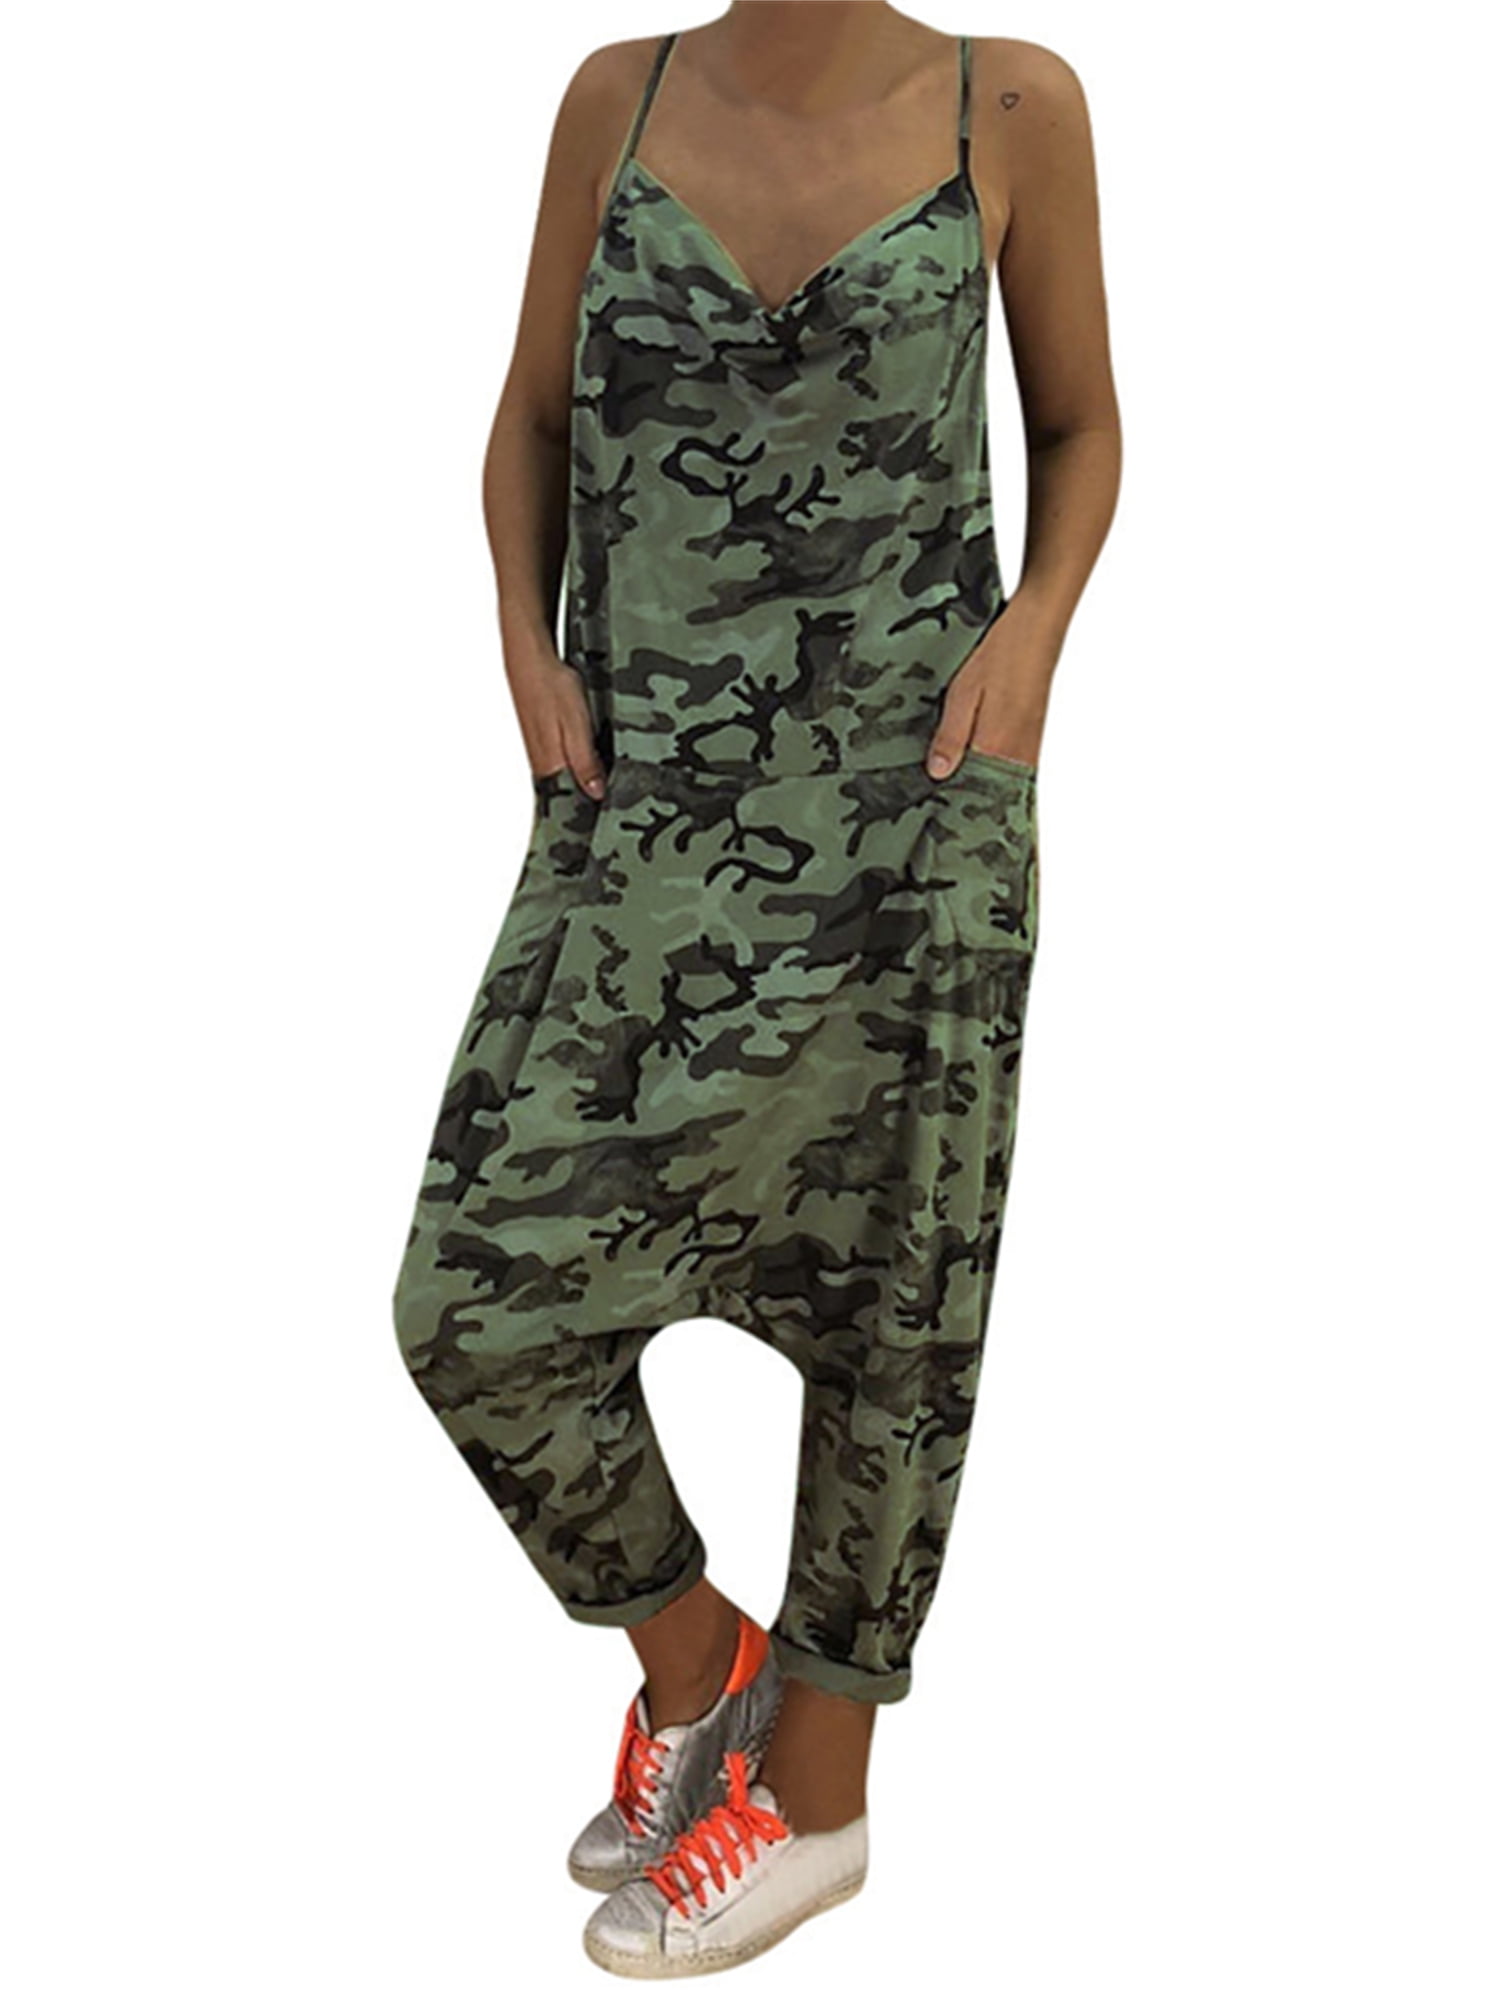 Coolred-Women Button Down Roll up Short Pants Camo Military Playsuit Romper 